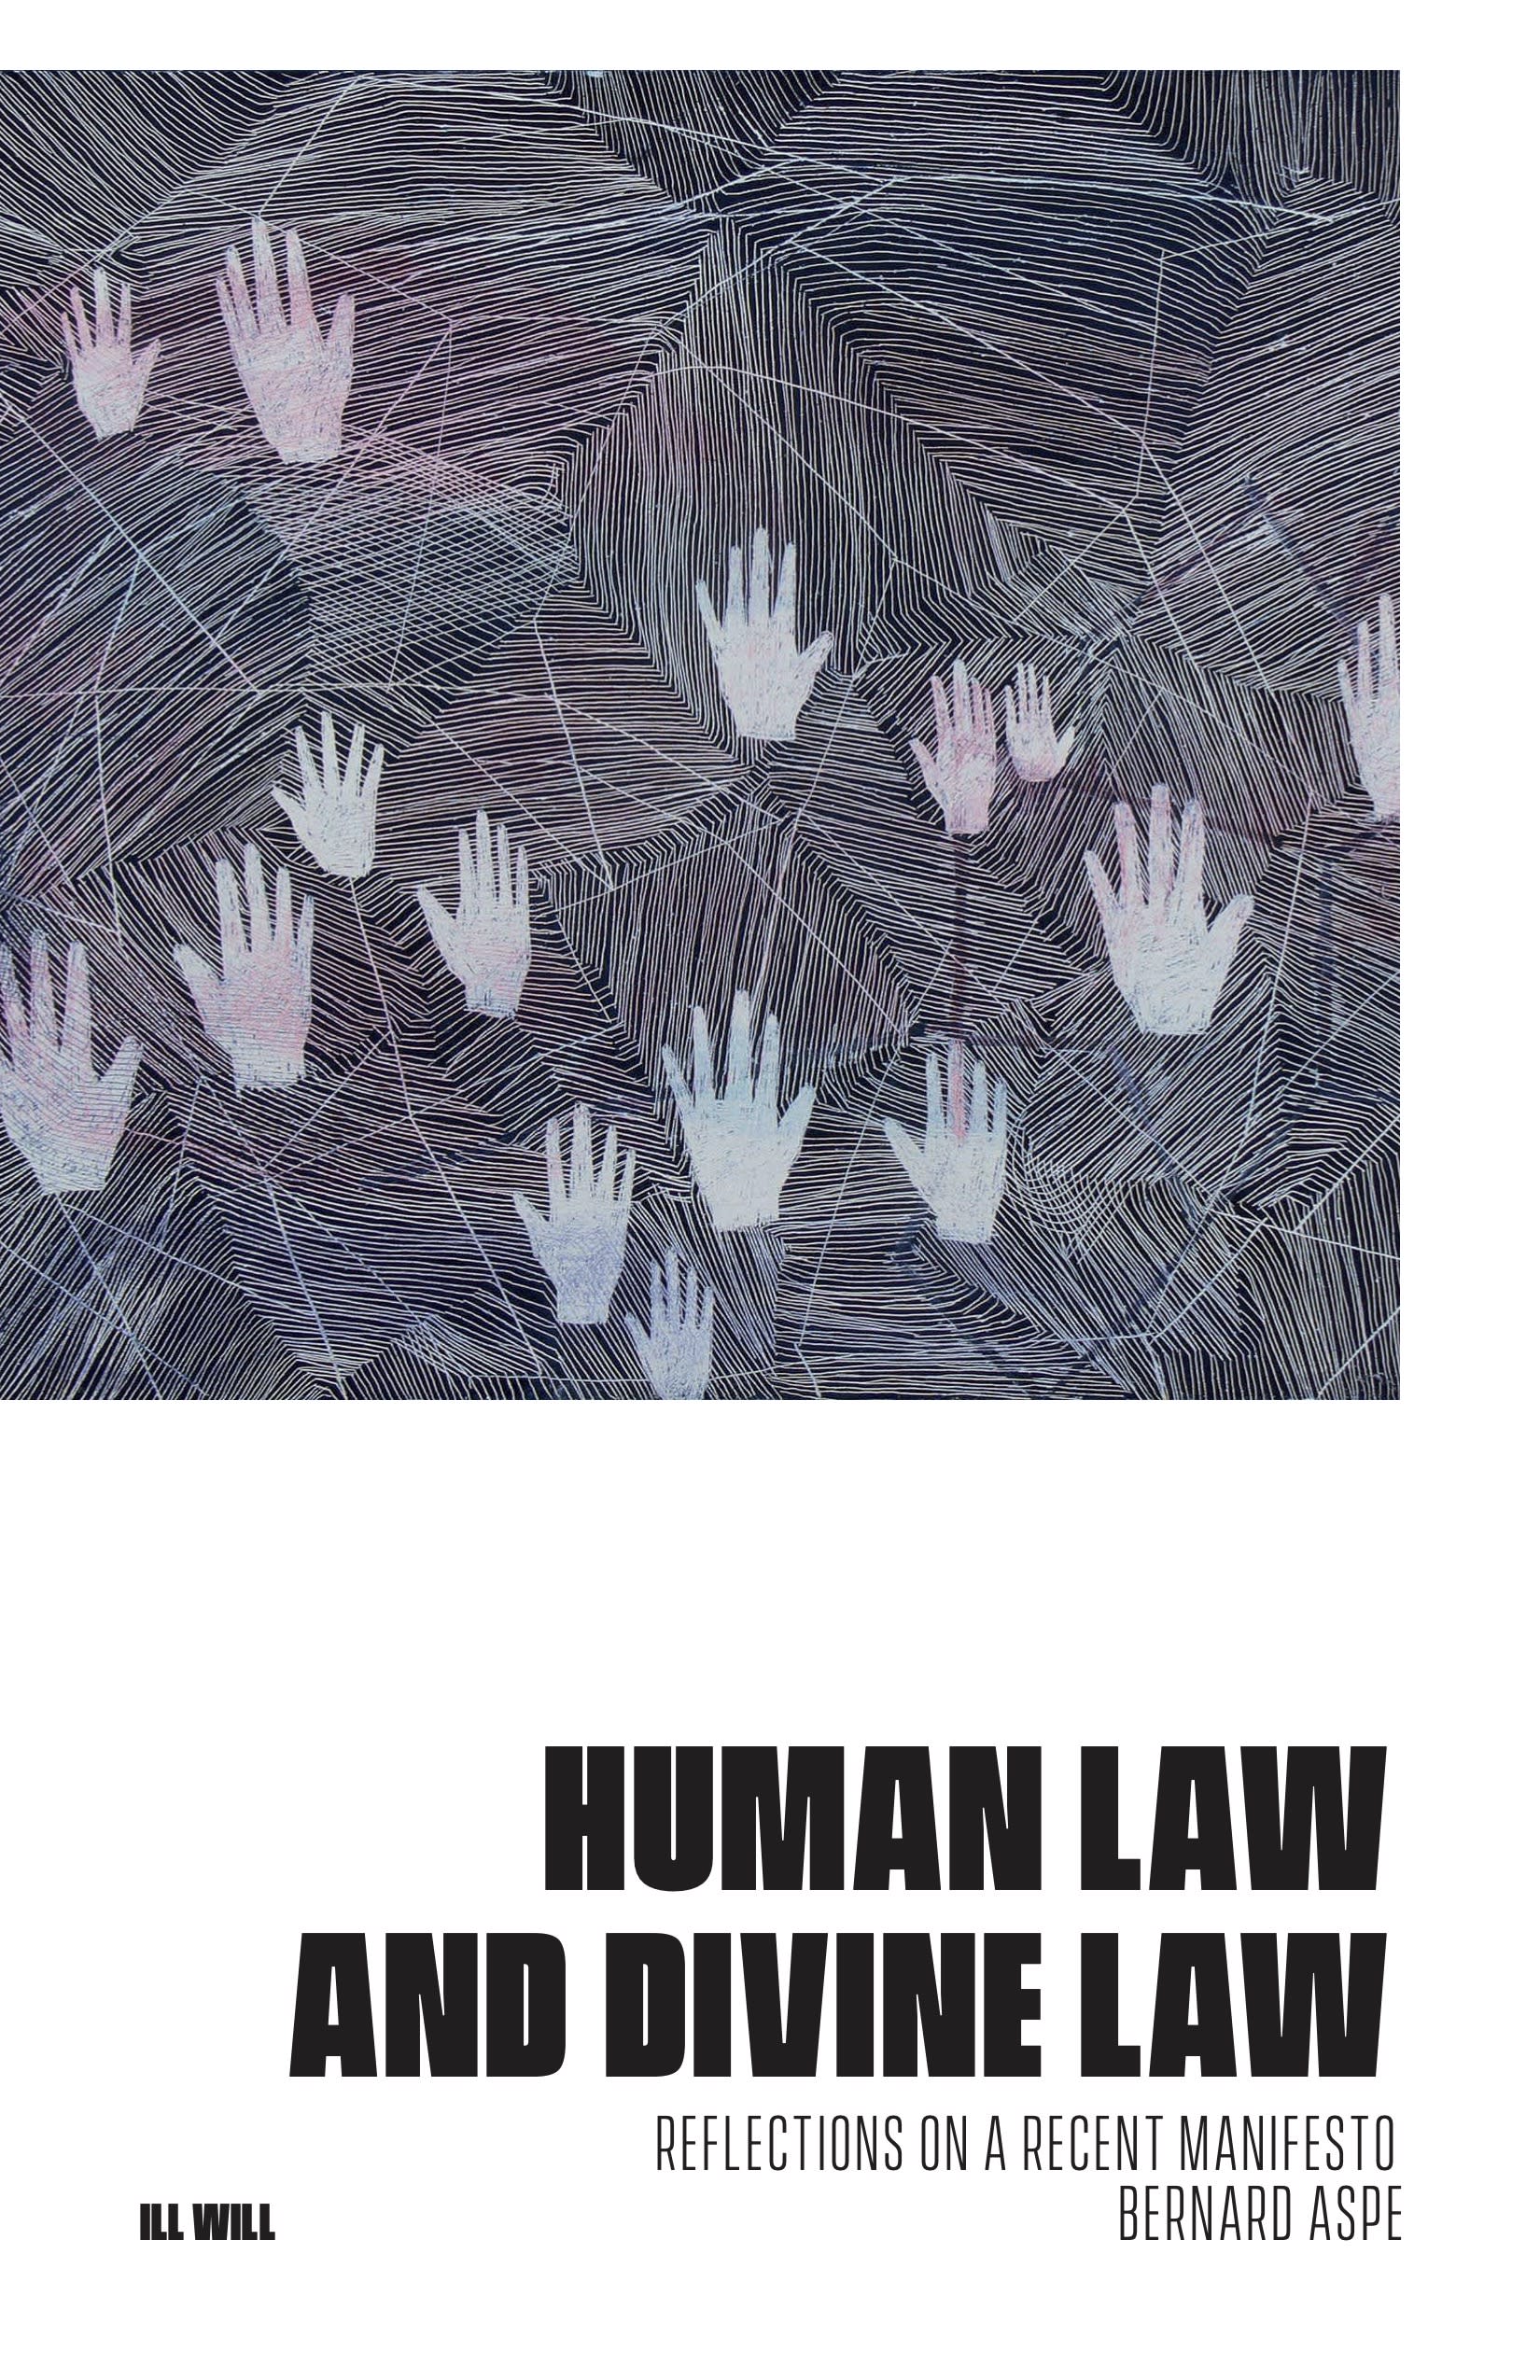 Cover Image for Human Law and Divine Law (Reflections on a Recent Manifesto)